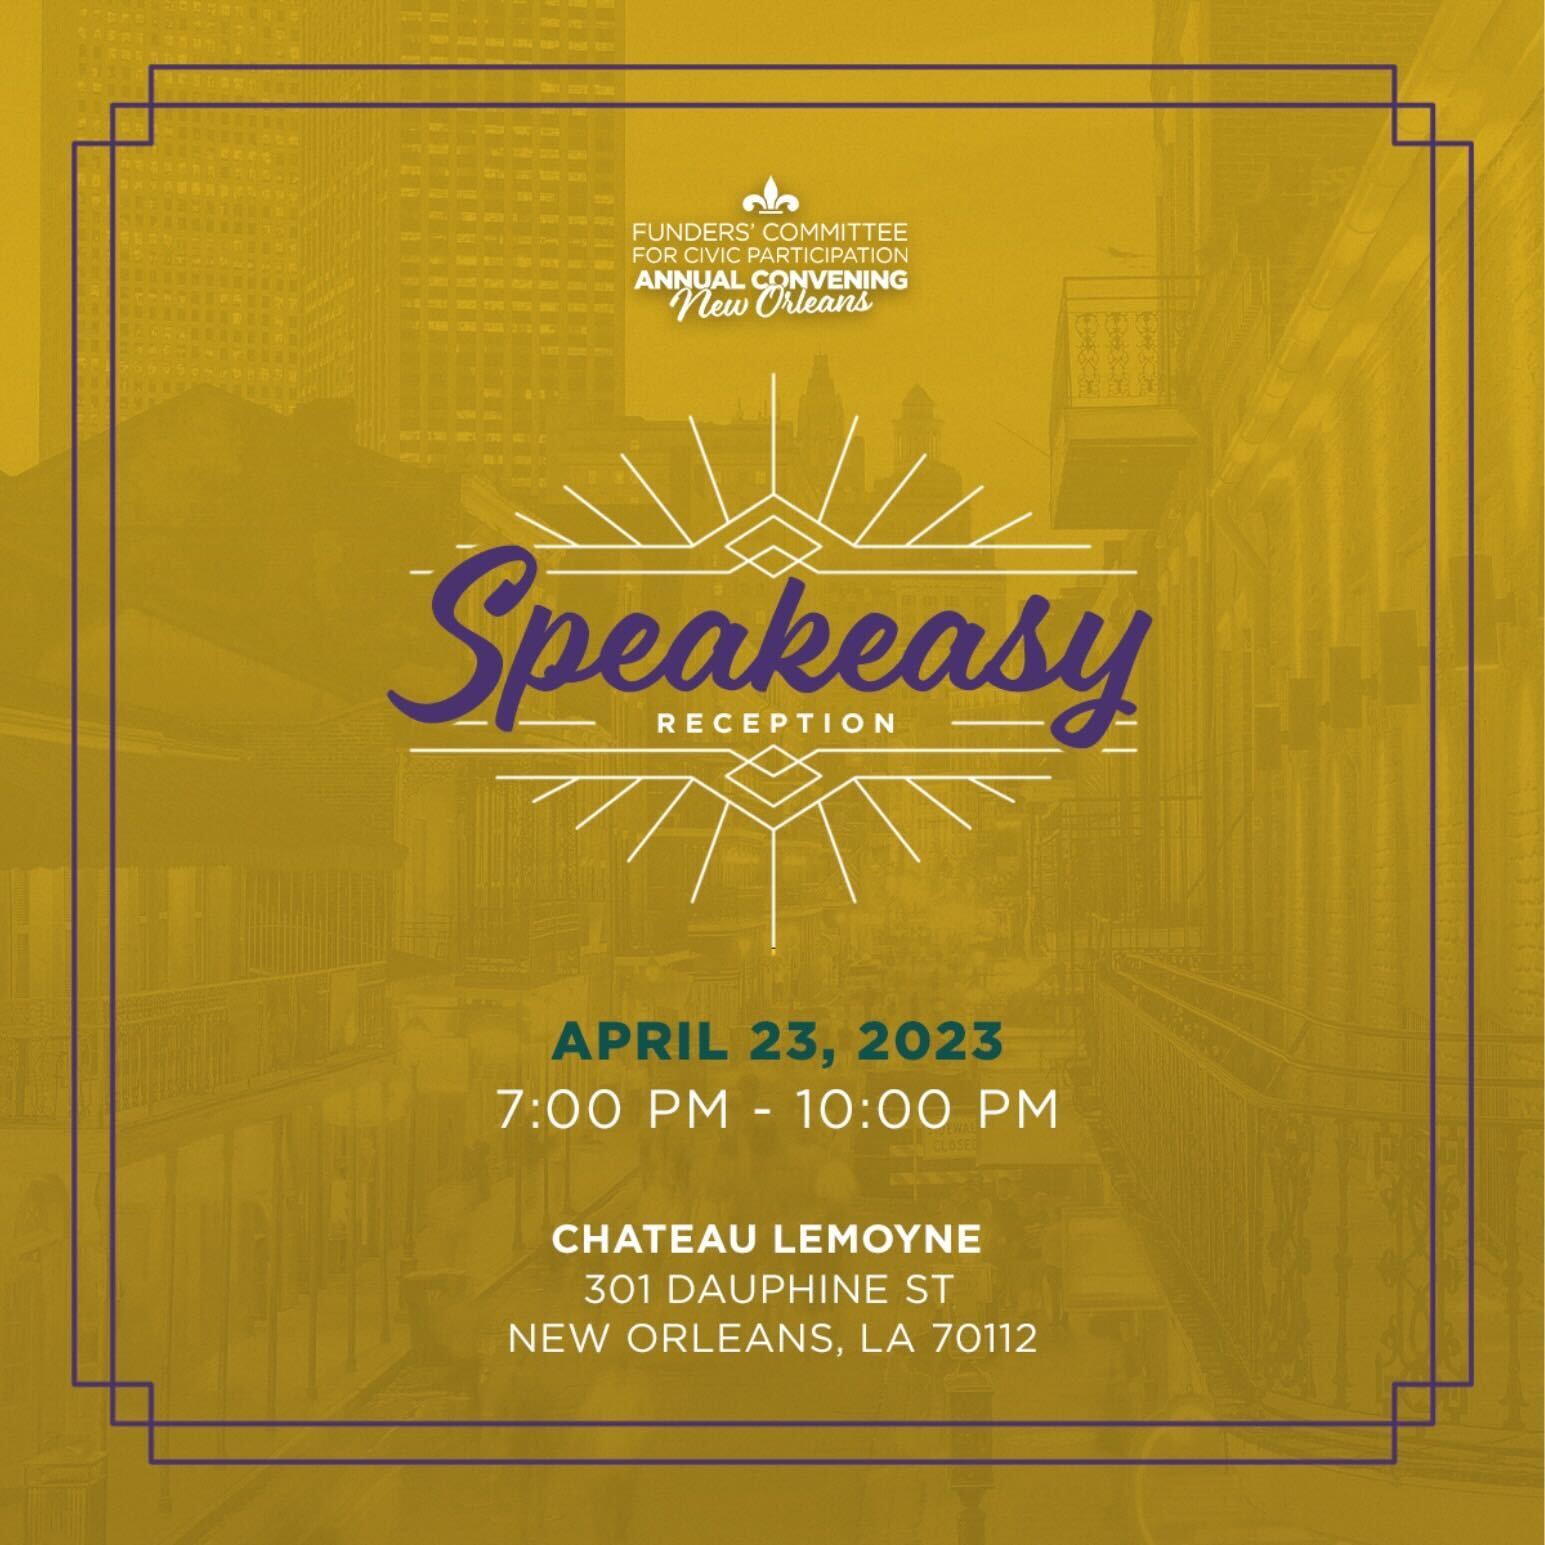 Funders' Committee for Civic Participation Annual Convening New Orleans Speakeasy Reception April 23, 2023 7:00PM-10:00PM Chateau Lemoyne 301 Dauphine St. New Orleans, LA 70112 On a photo of a street of New Orleans with a gold overlay. There is a purple border and art deco look to the Speakeasy Reception text.